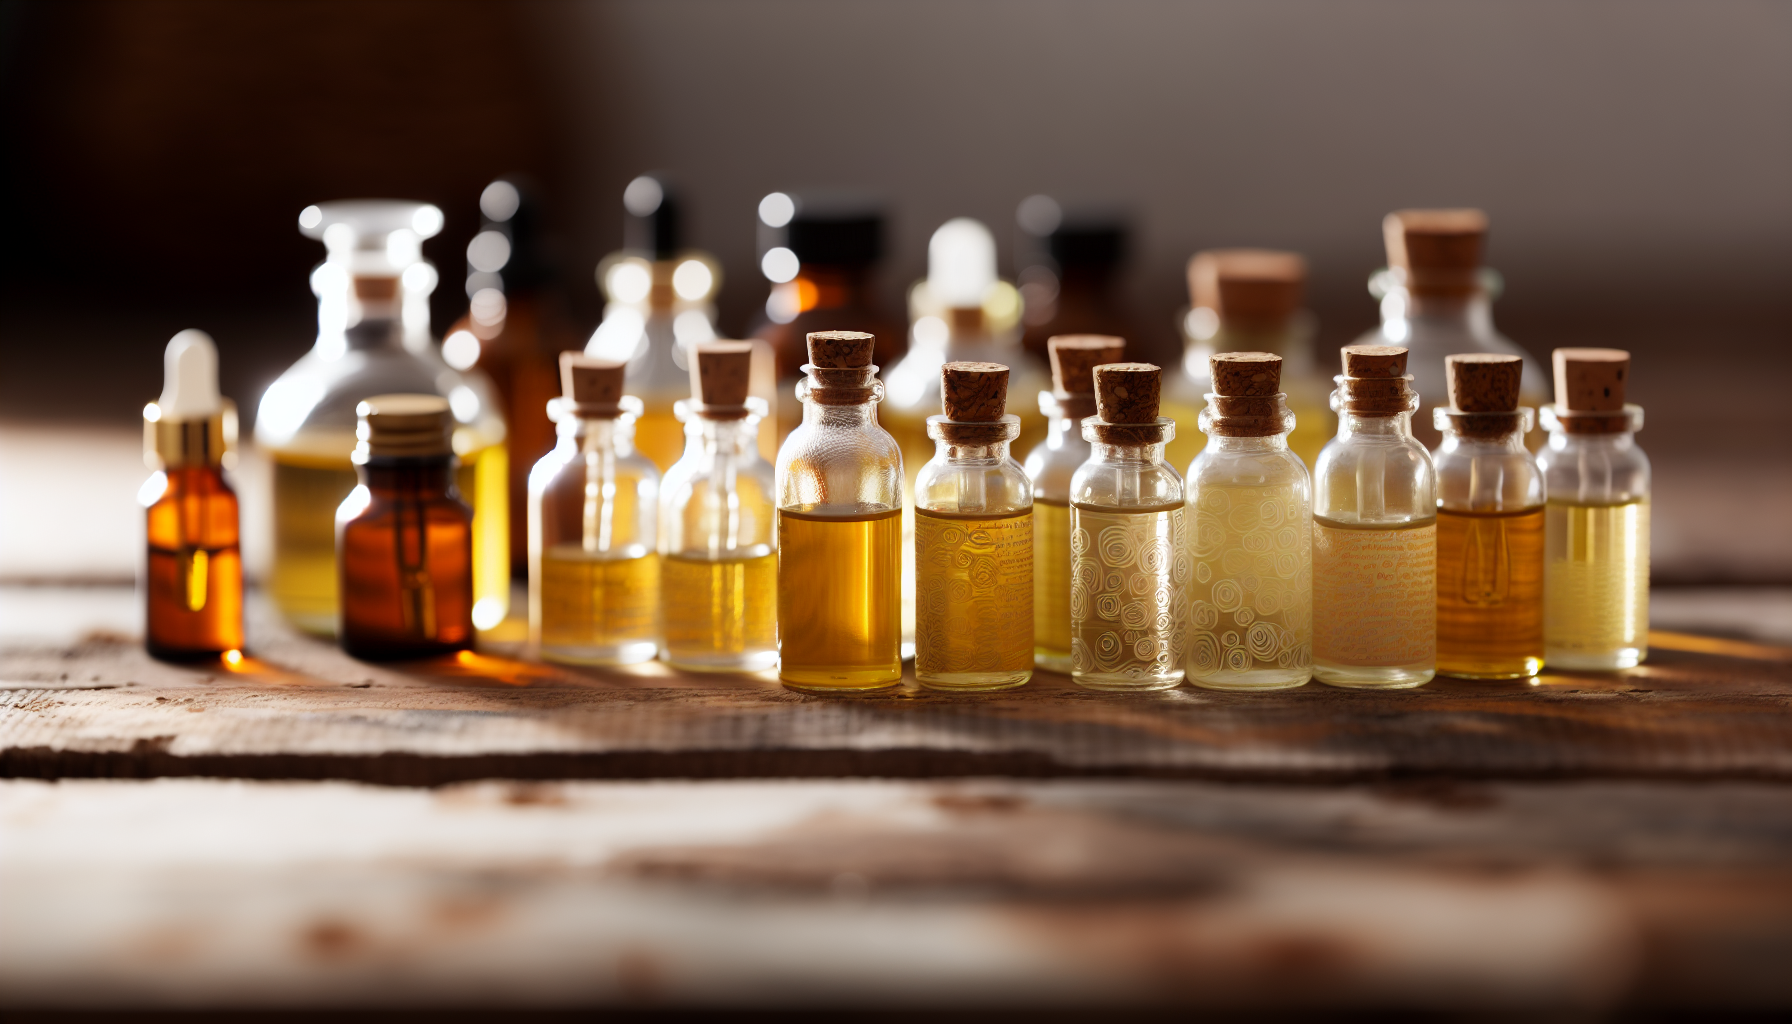 Bottles of various beard oils lined up on a wooden surface